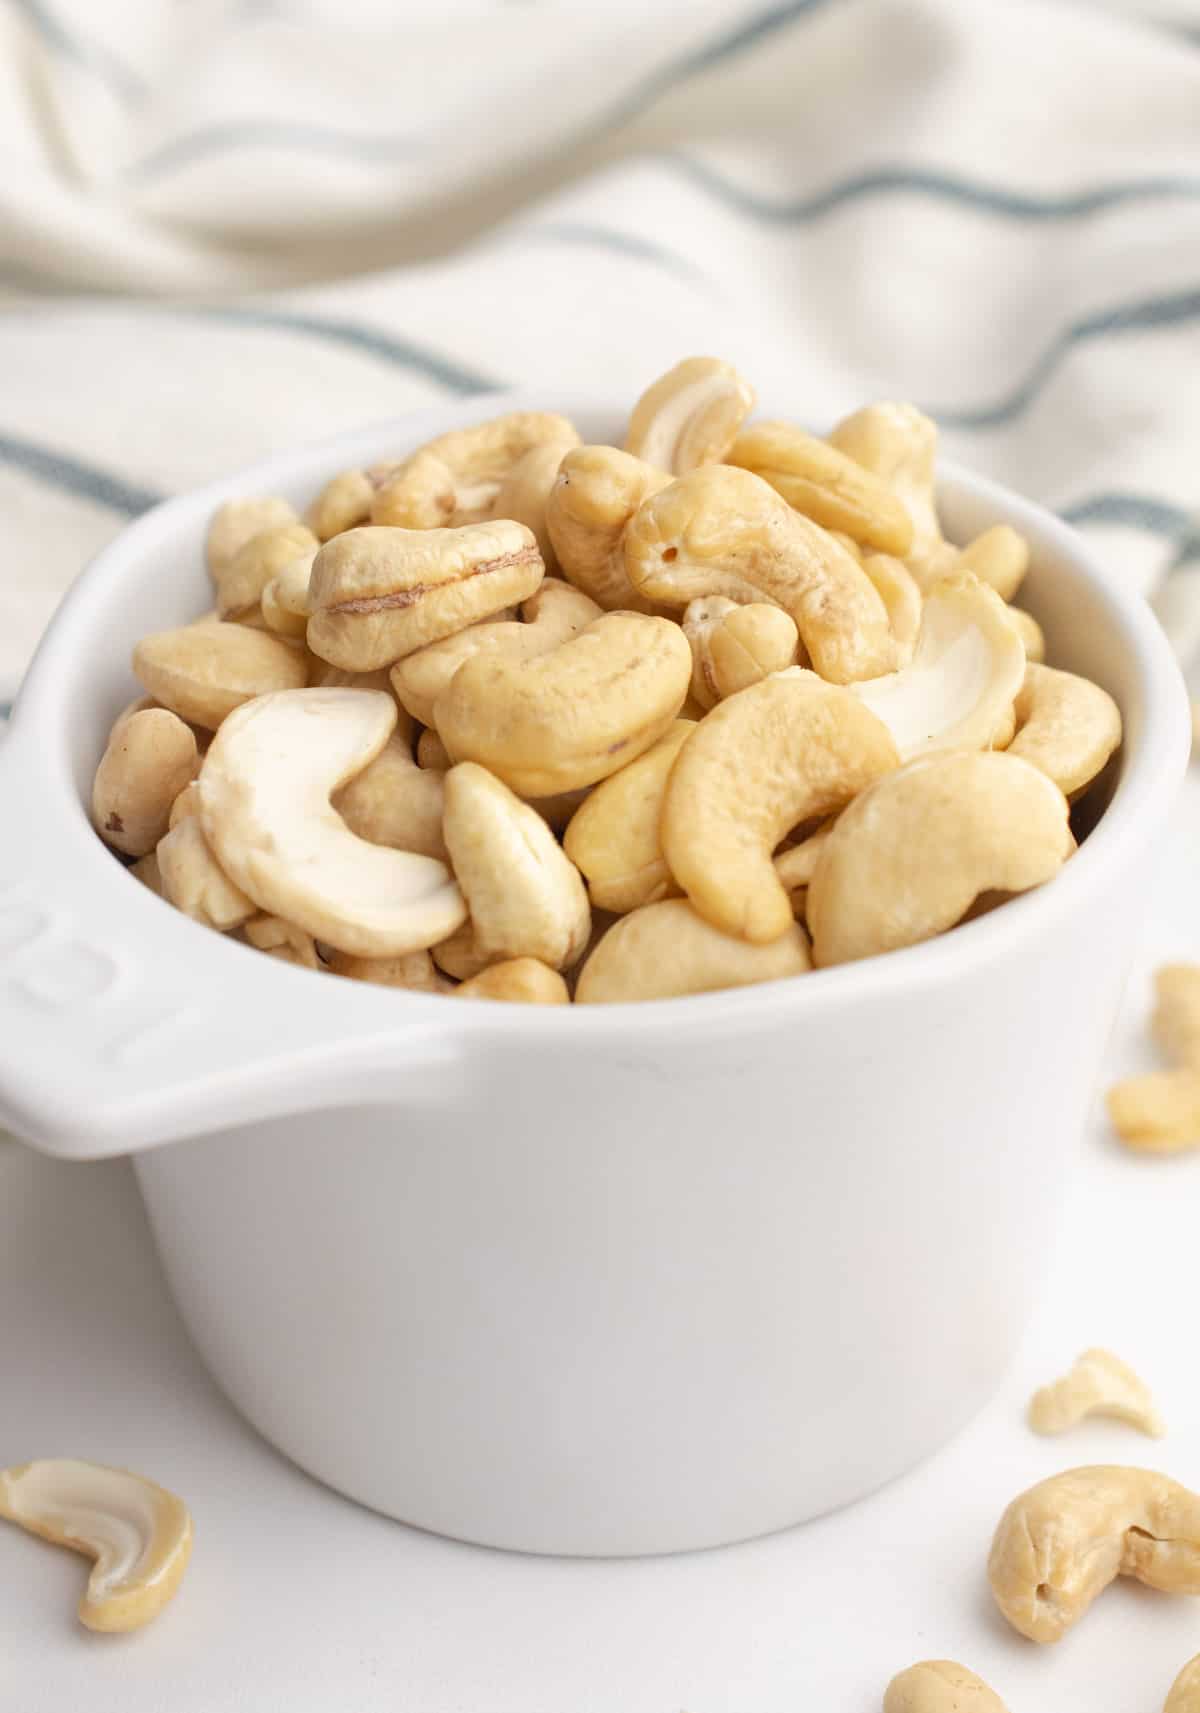 Raw cashews in a white measuring cup.